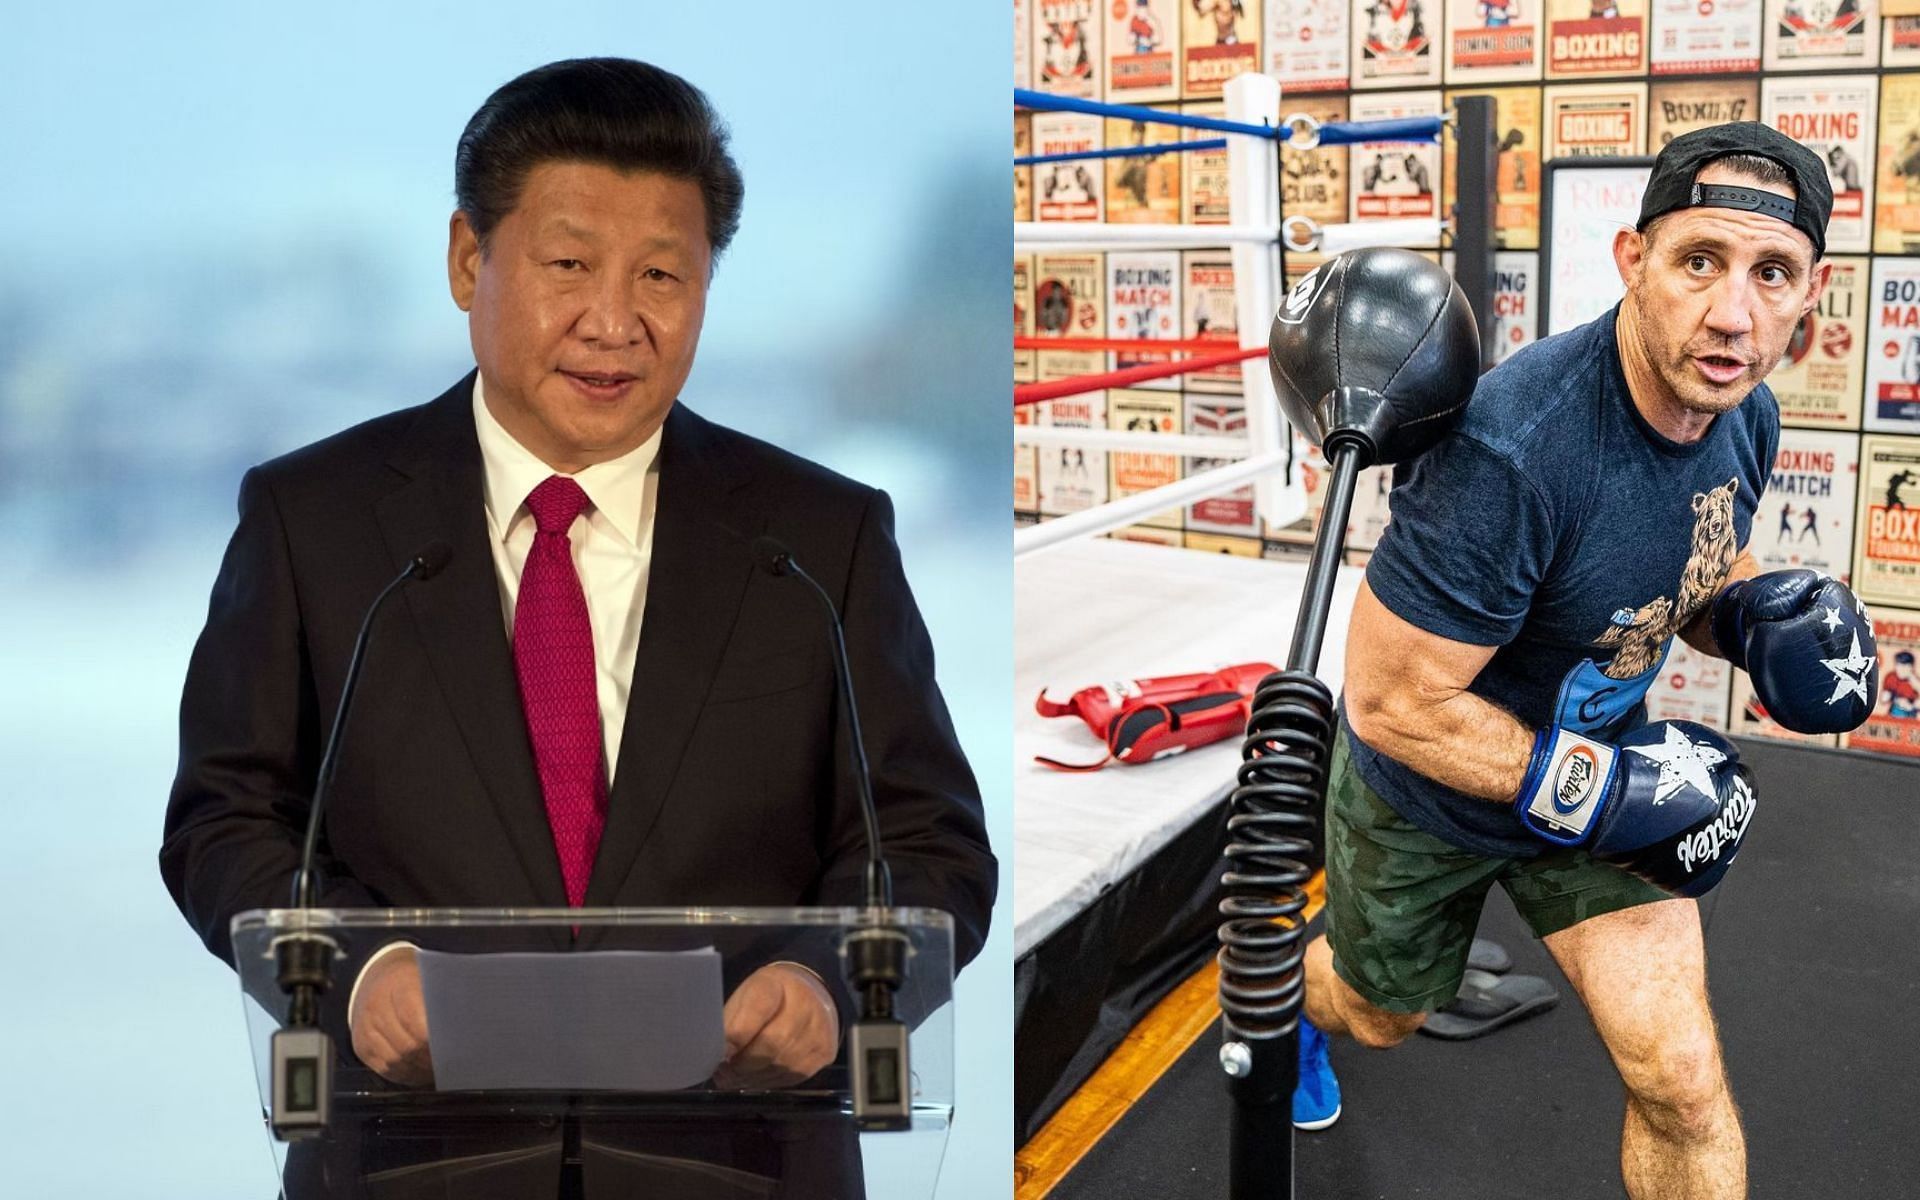 Xi Jinping (Left) and Tim Kennedy (Right) [Images via: @timkennedymma on Instagram]